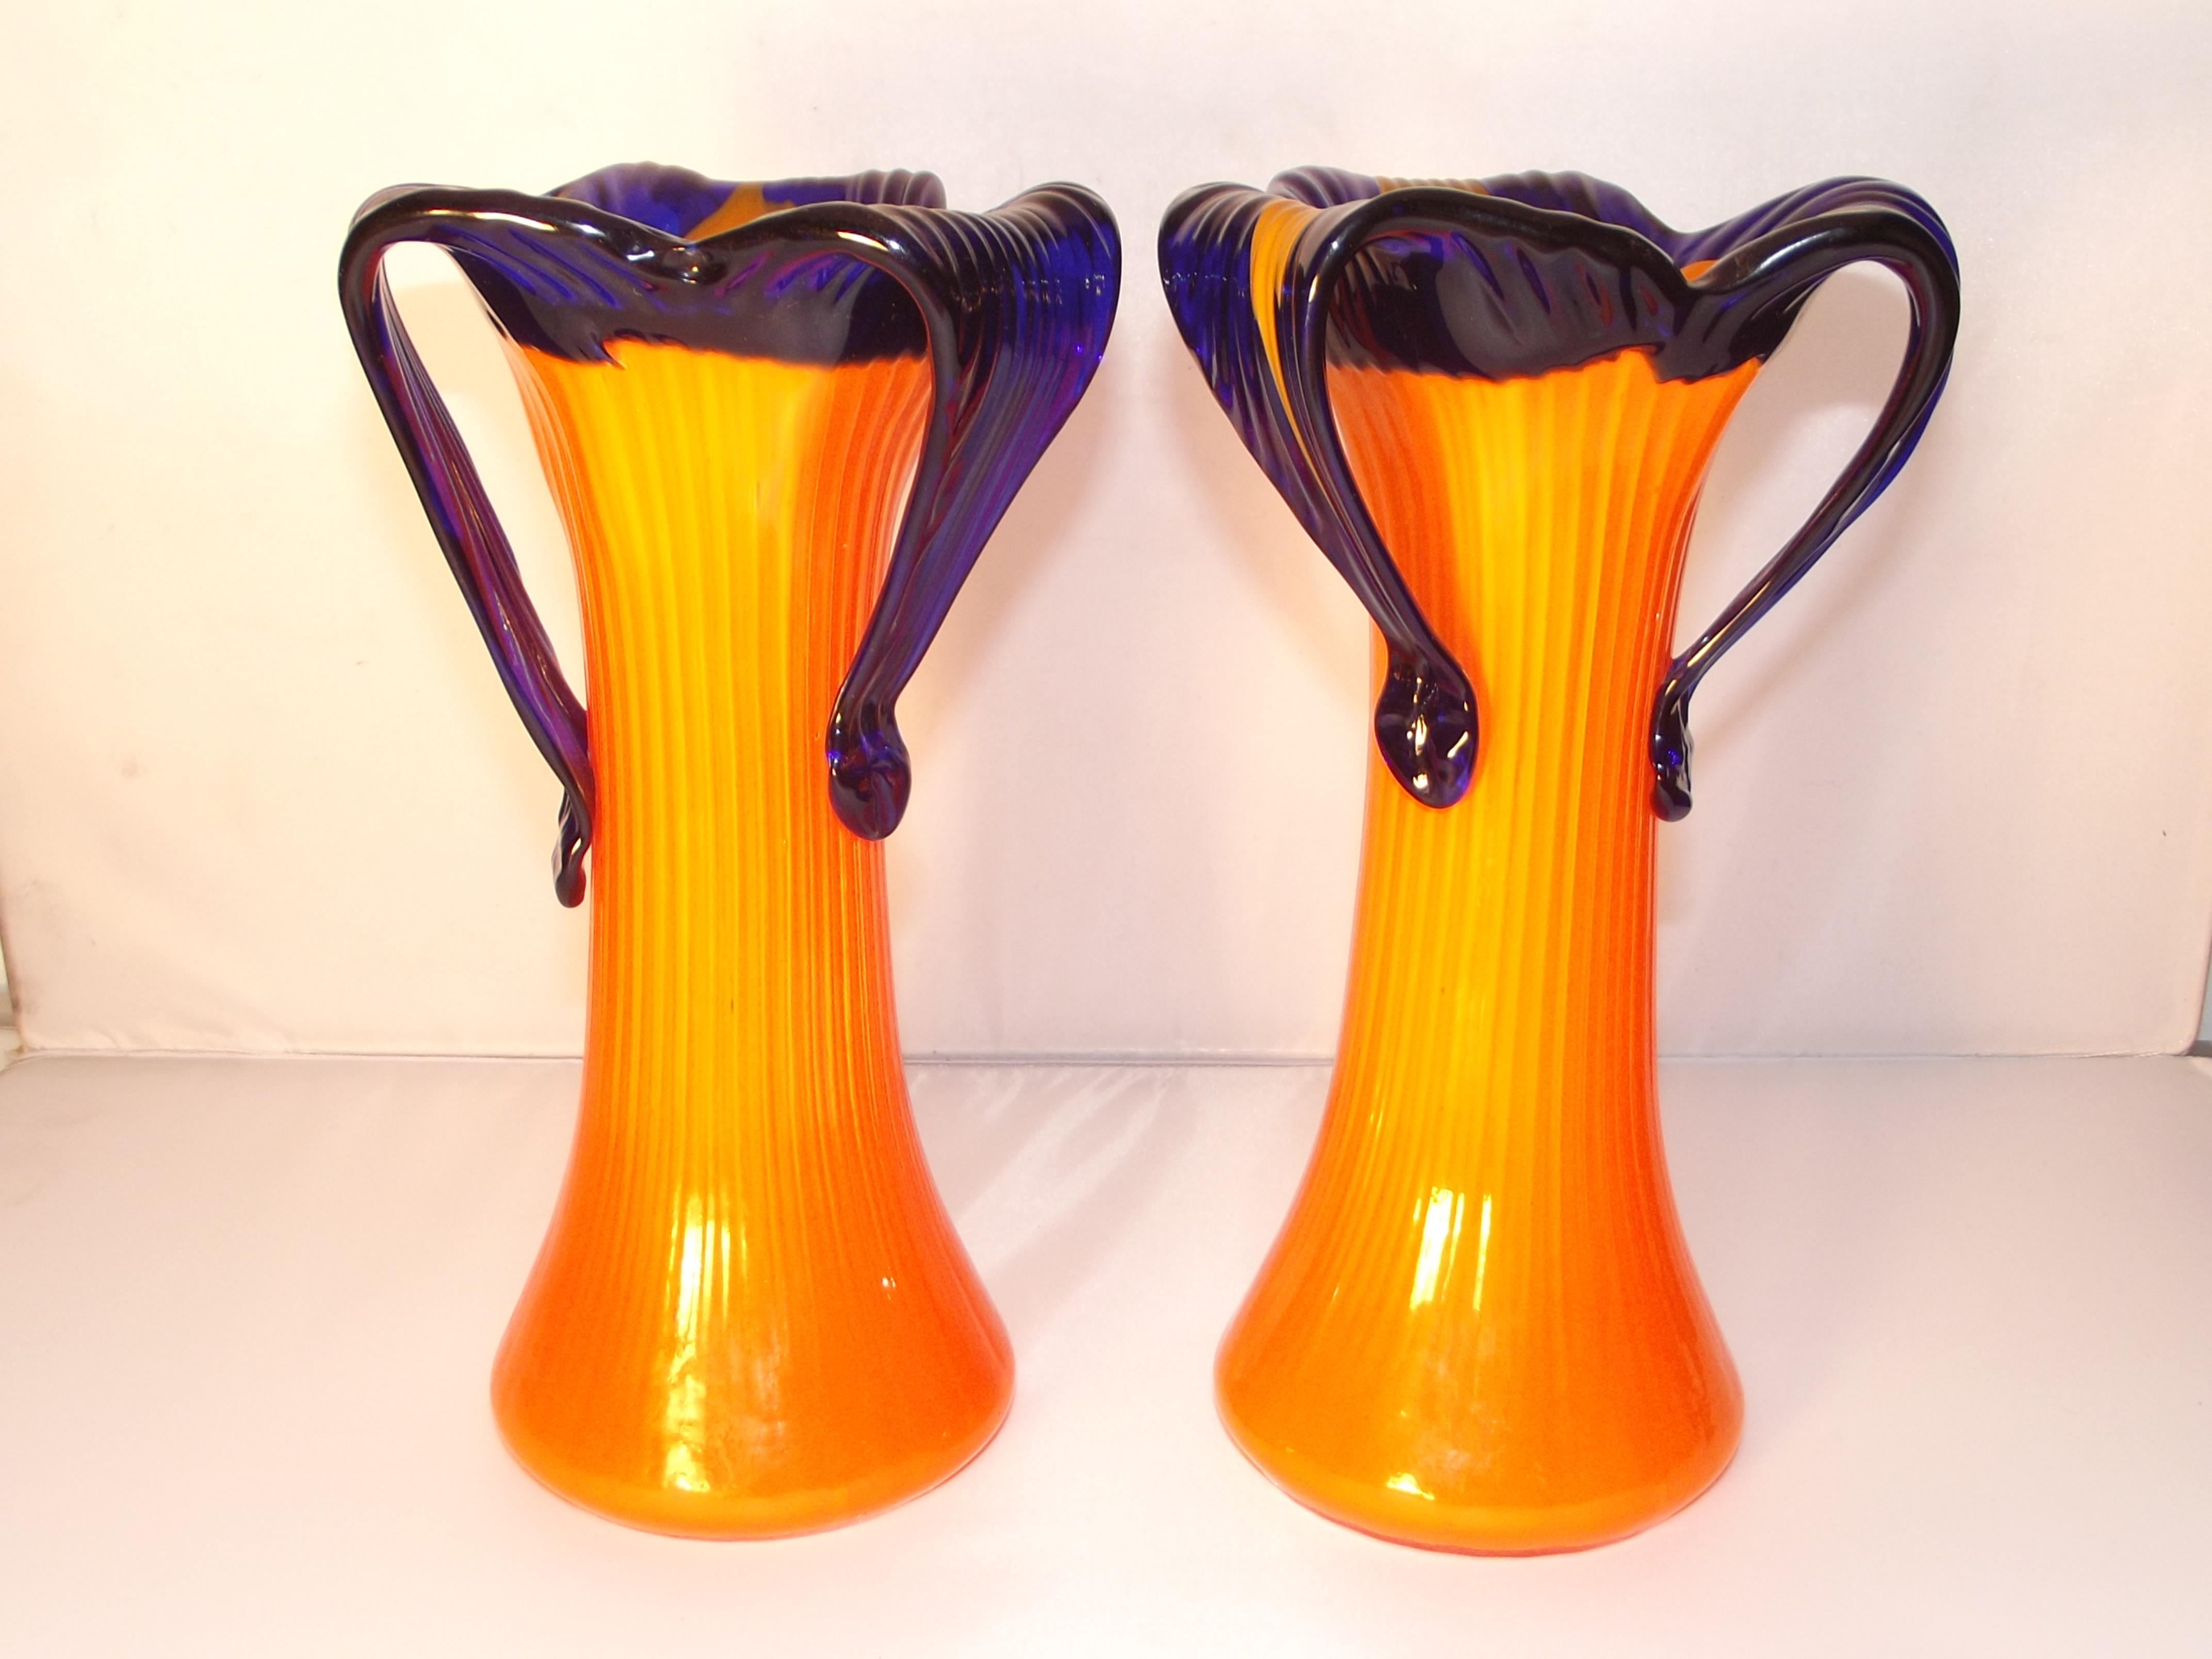 A pair of 1950/60s glass vases. Unusual shape and style with orange and cobalt blue. 20cm high